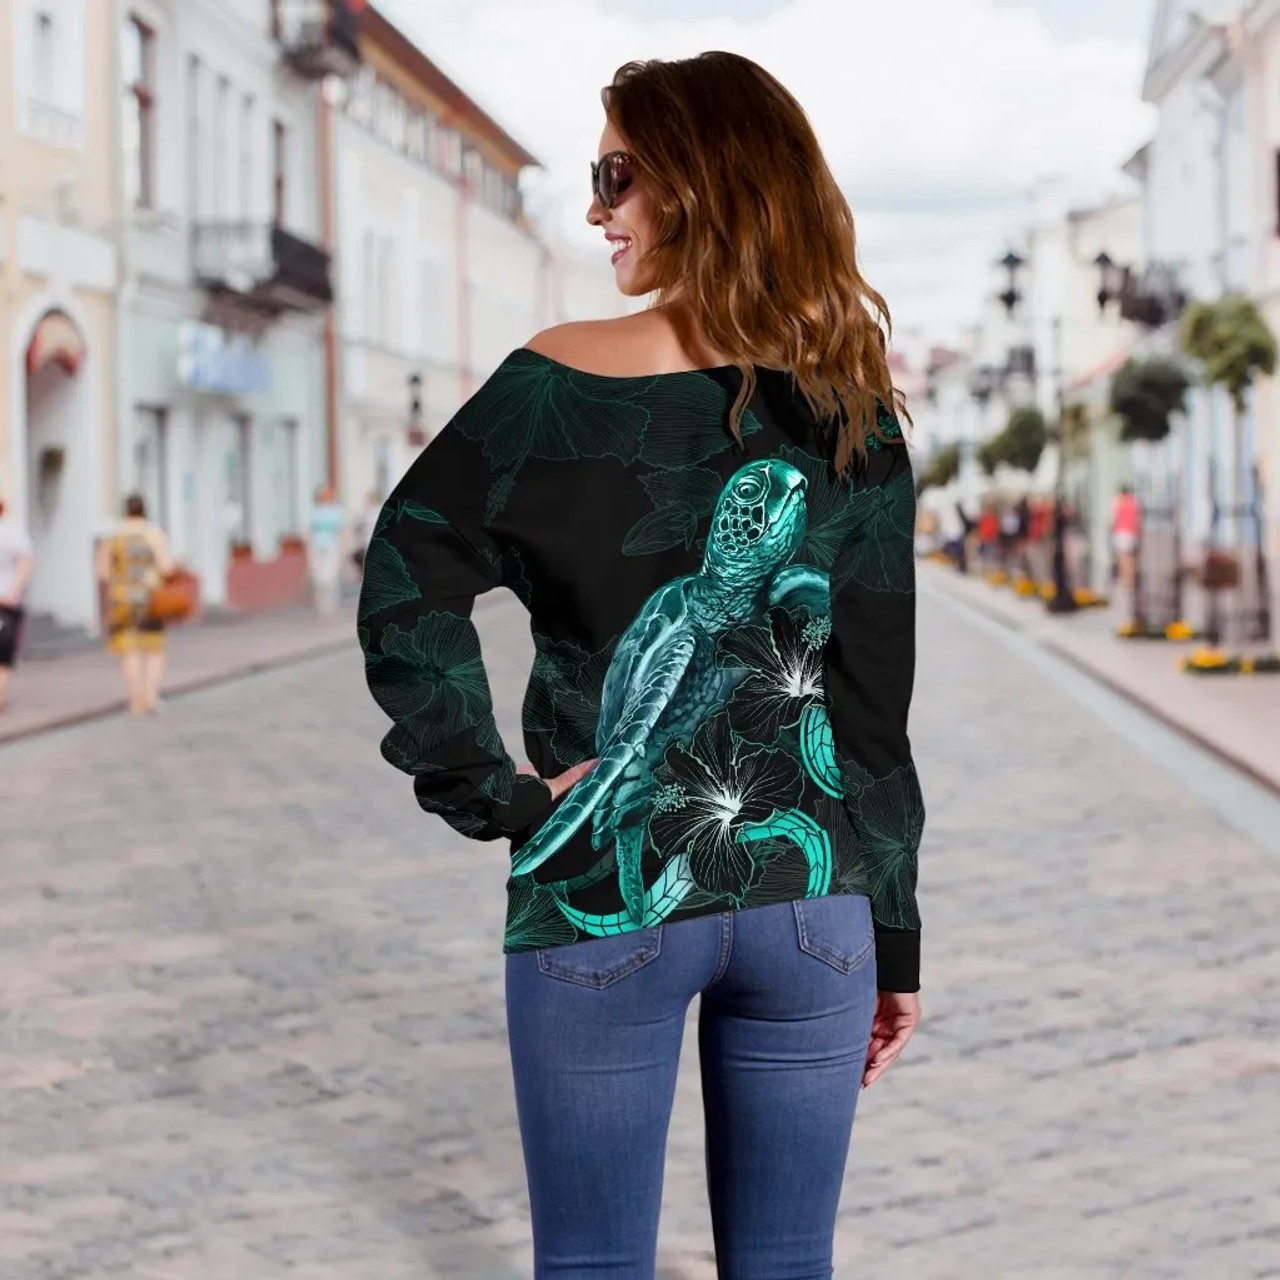 Cook Islands Polynesian Women Off Shoulder Sweater - Turtle With Blooming Hibiscus Turquoise 3